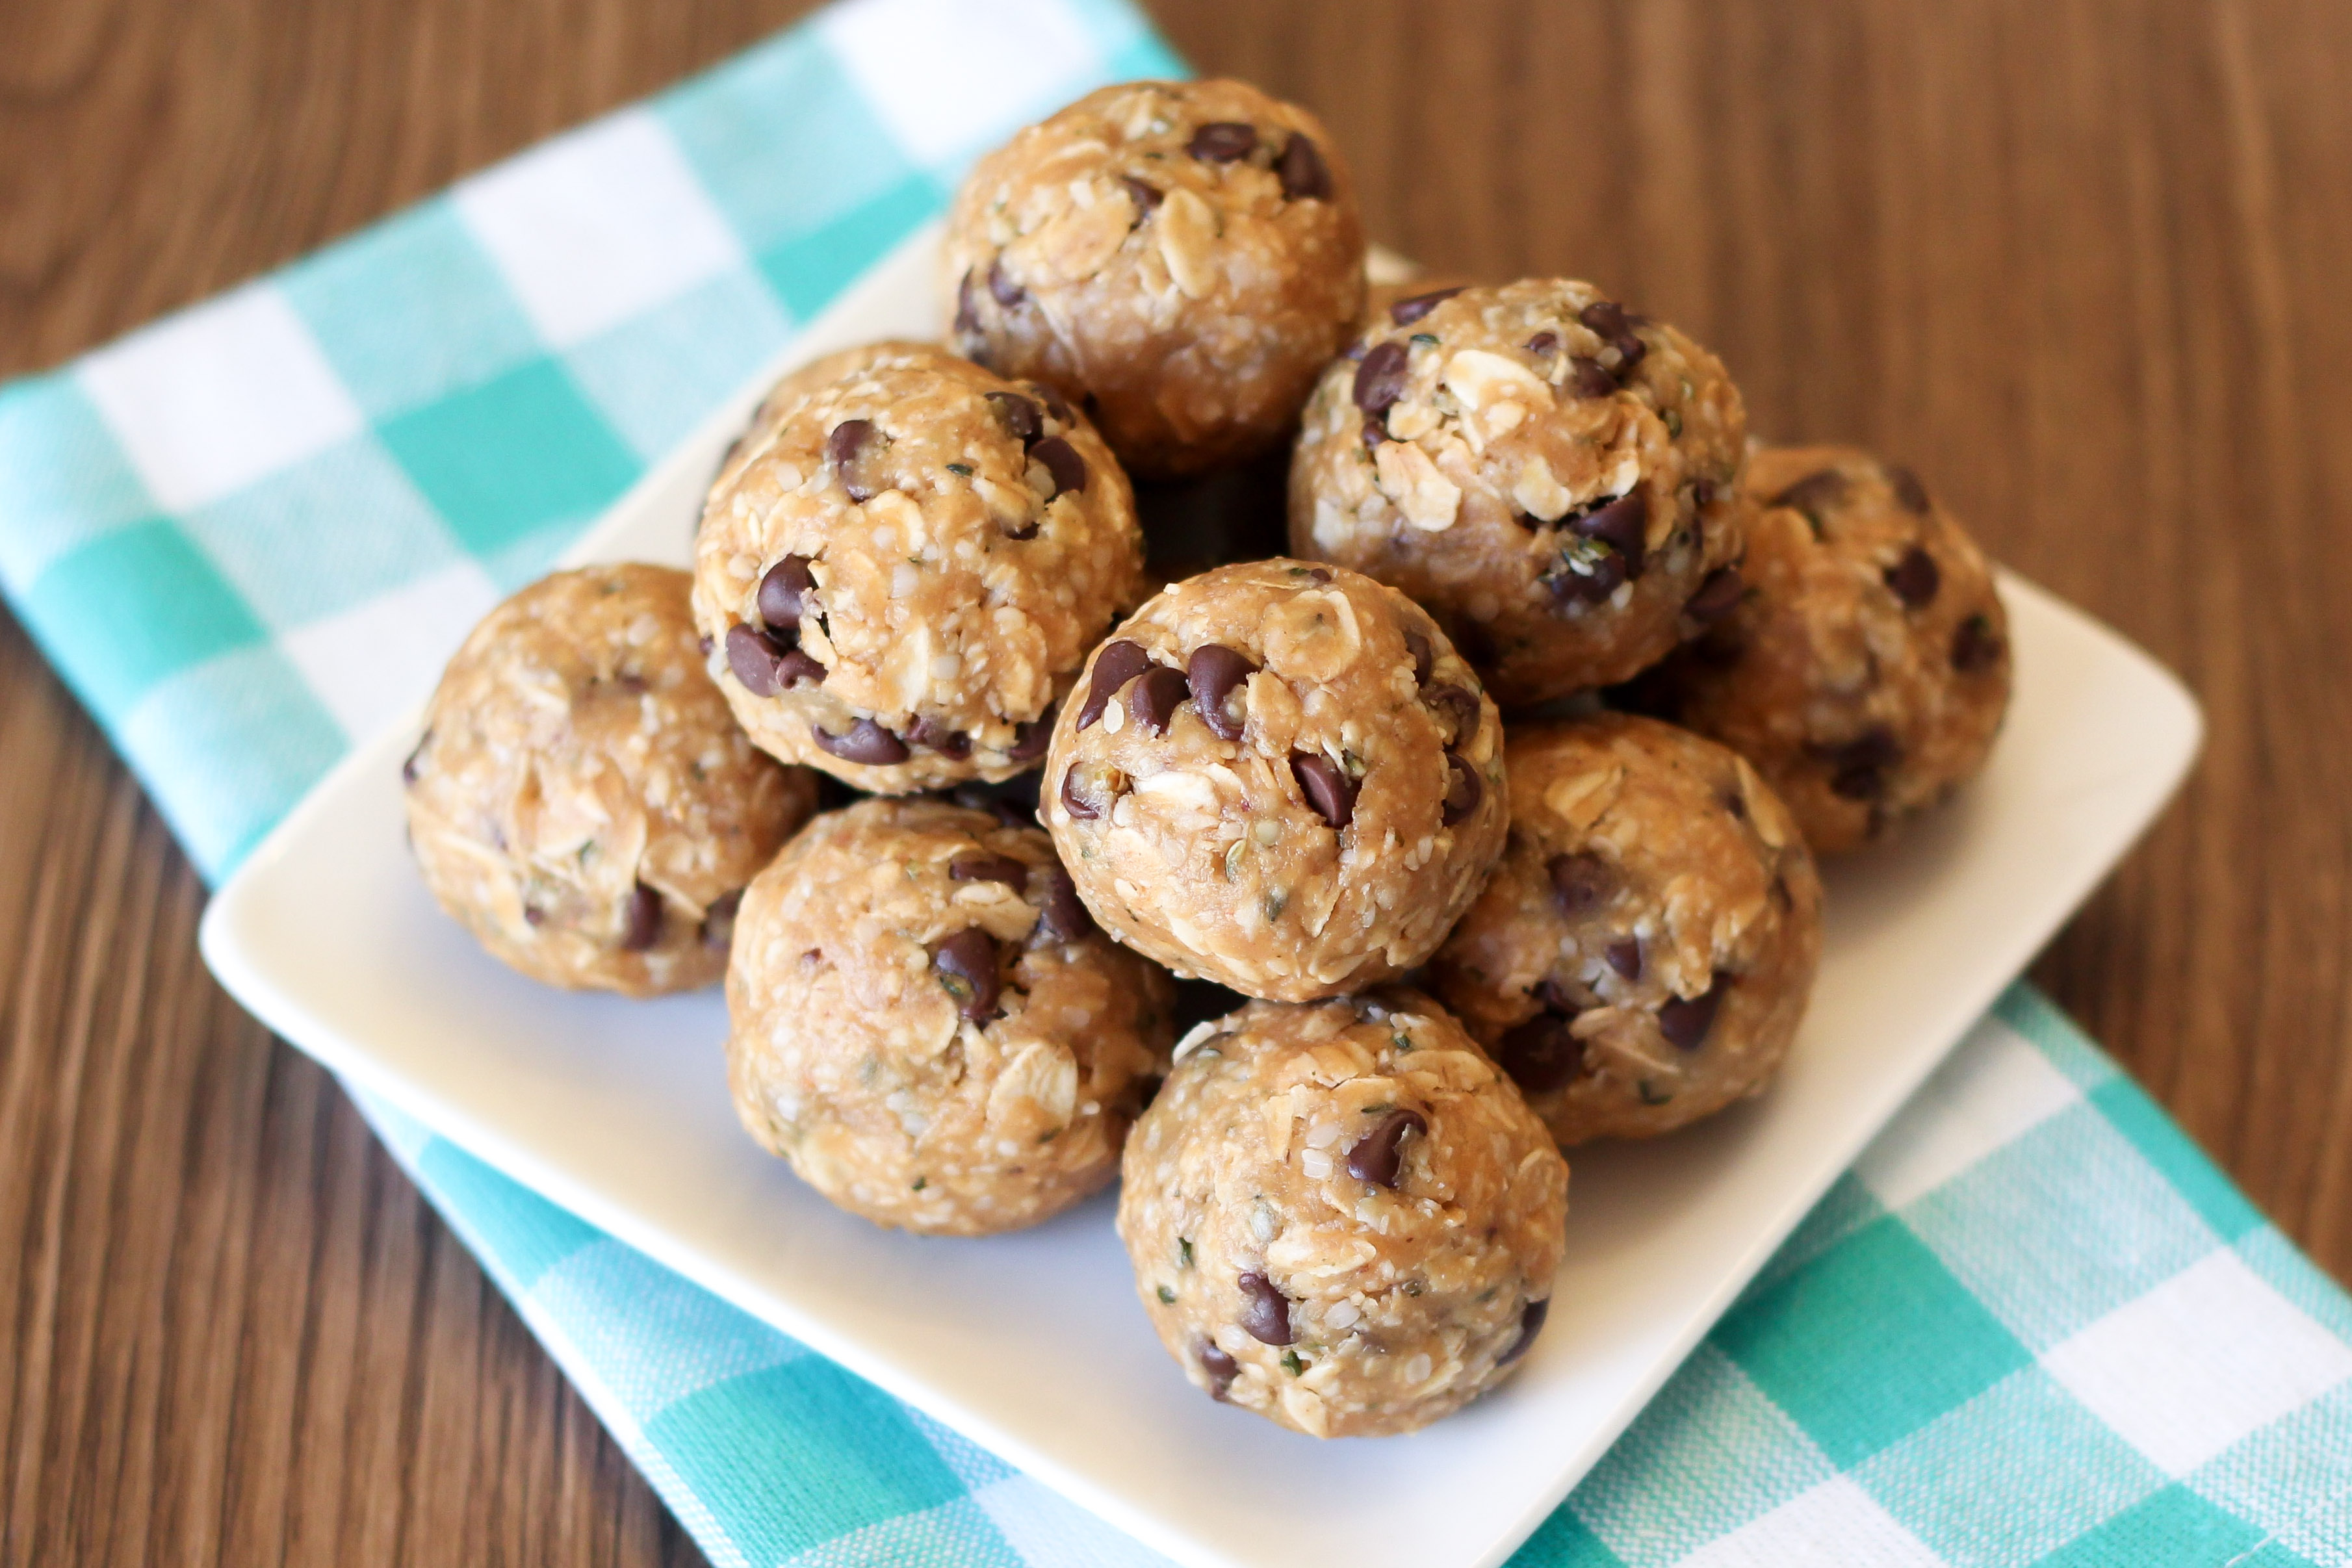 Gluten Free No-Bake Energy Bites. Loaded with protein and a great on-the-go snack!